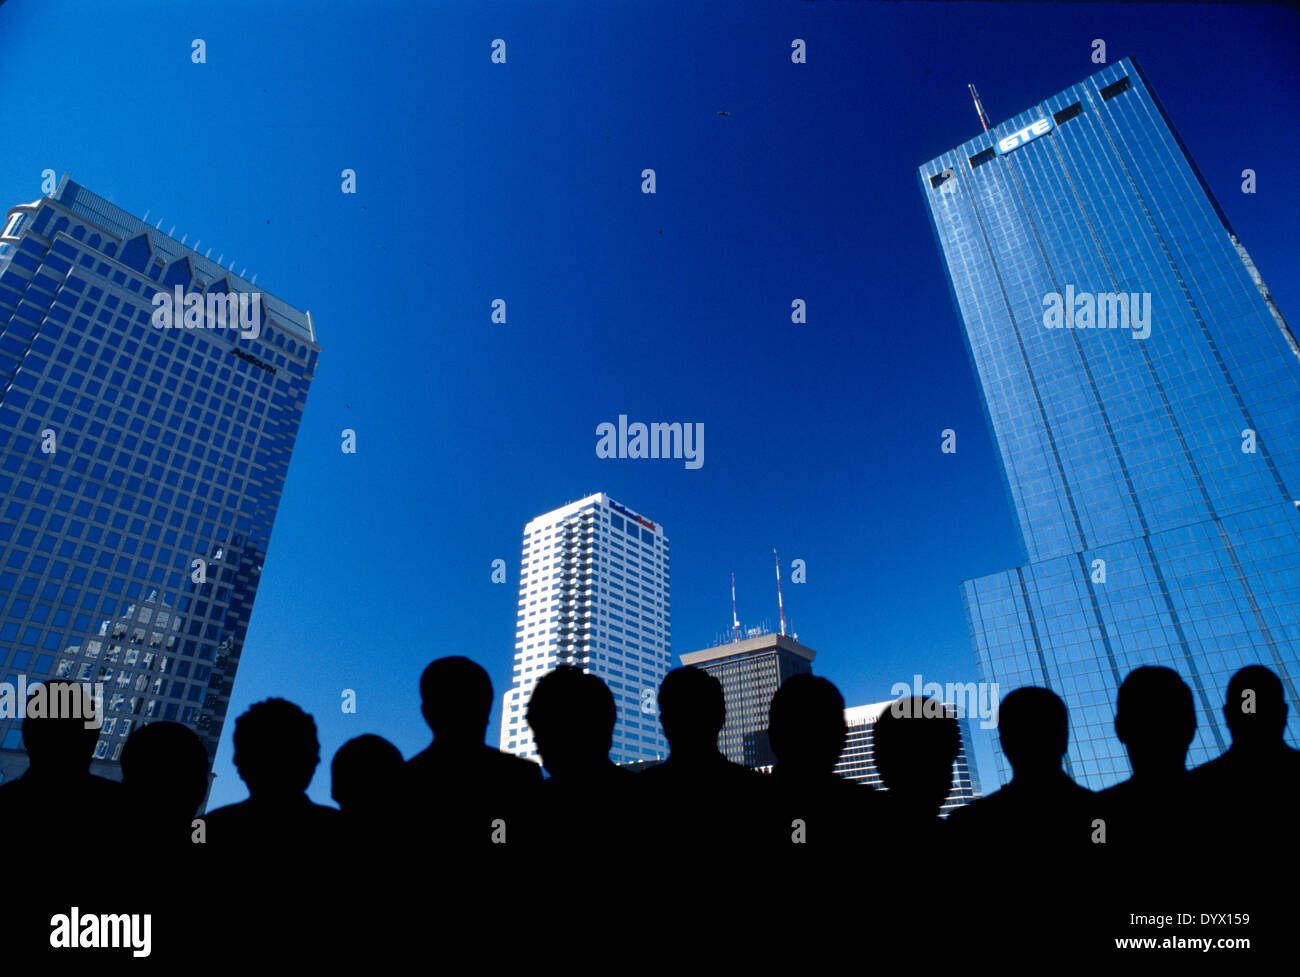 computer generated people in silhouette with city skyline Stock Photo